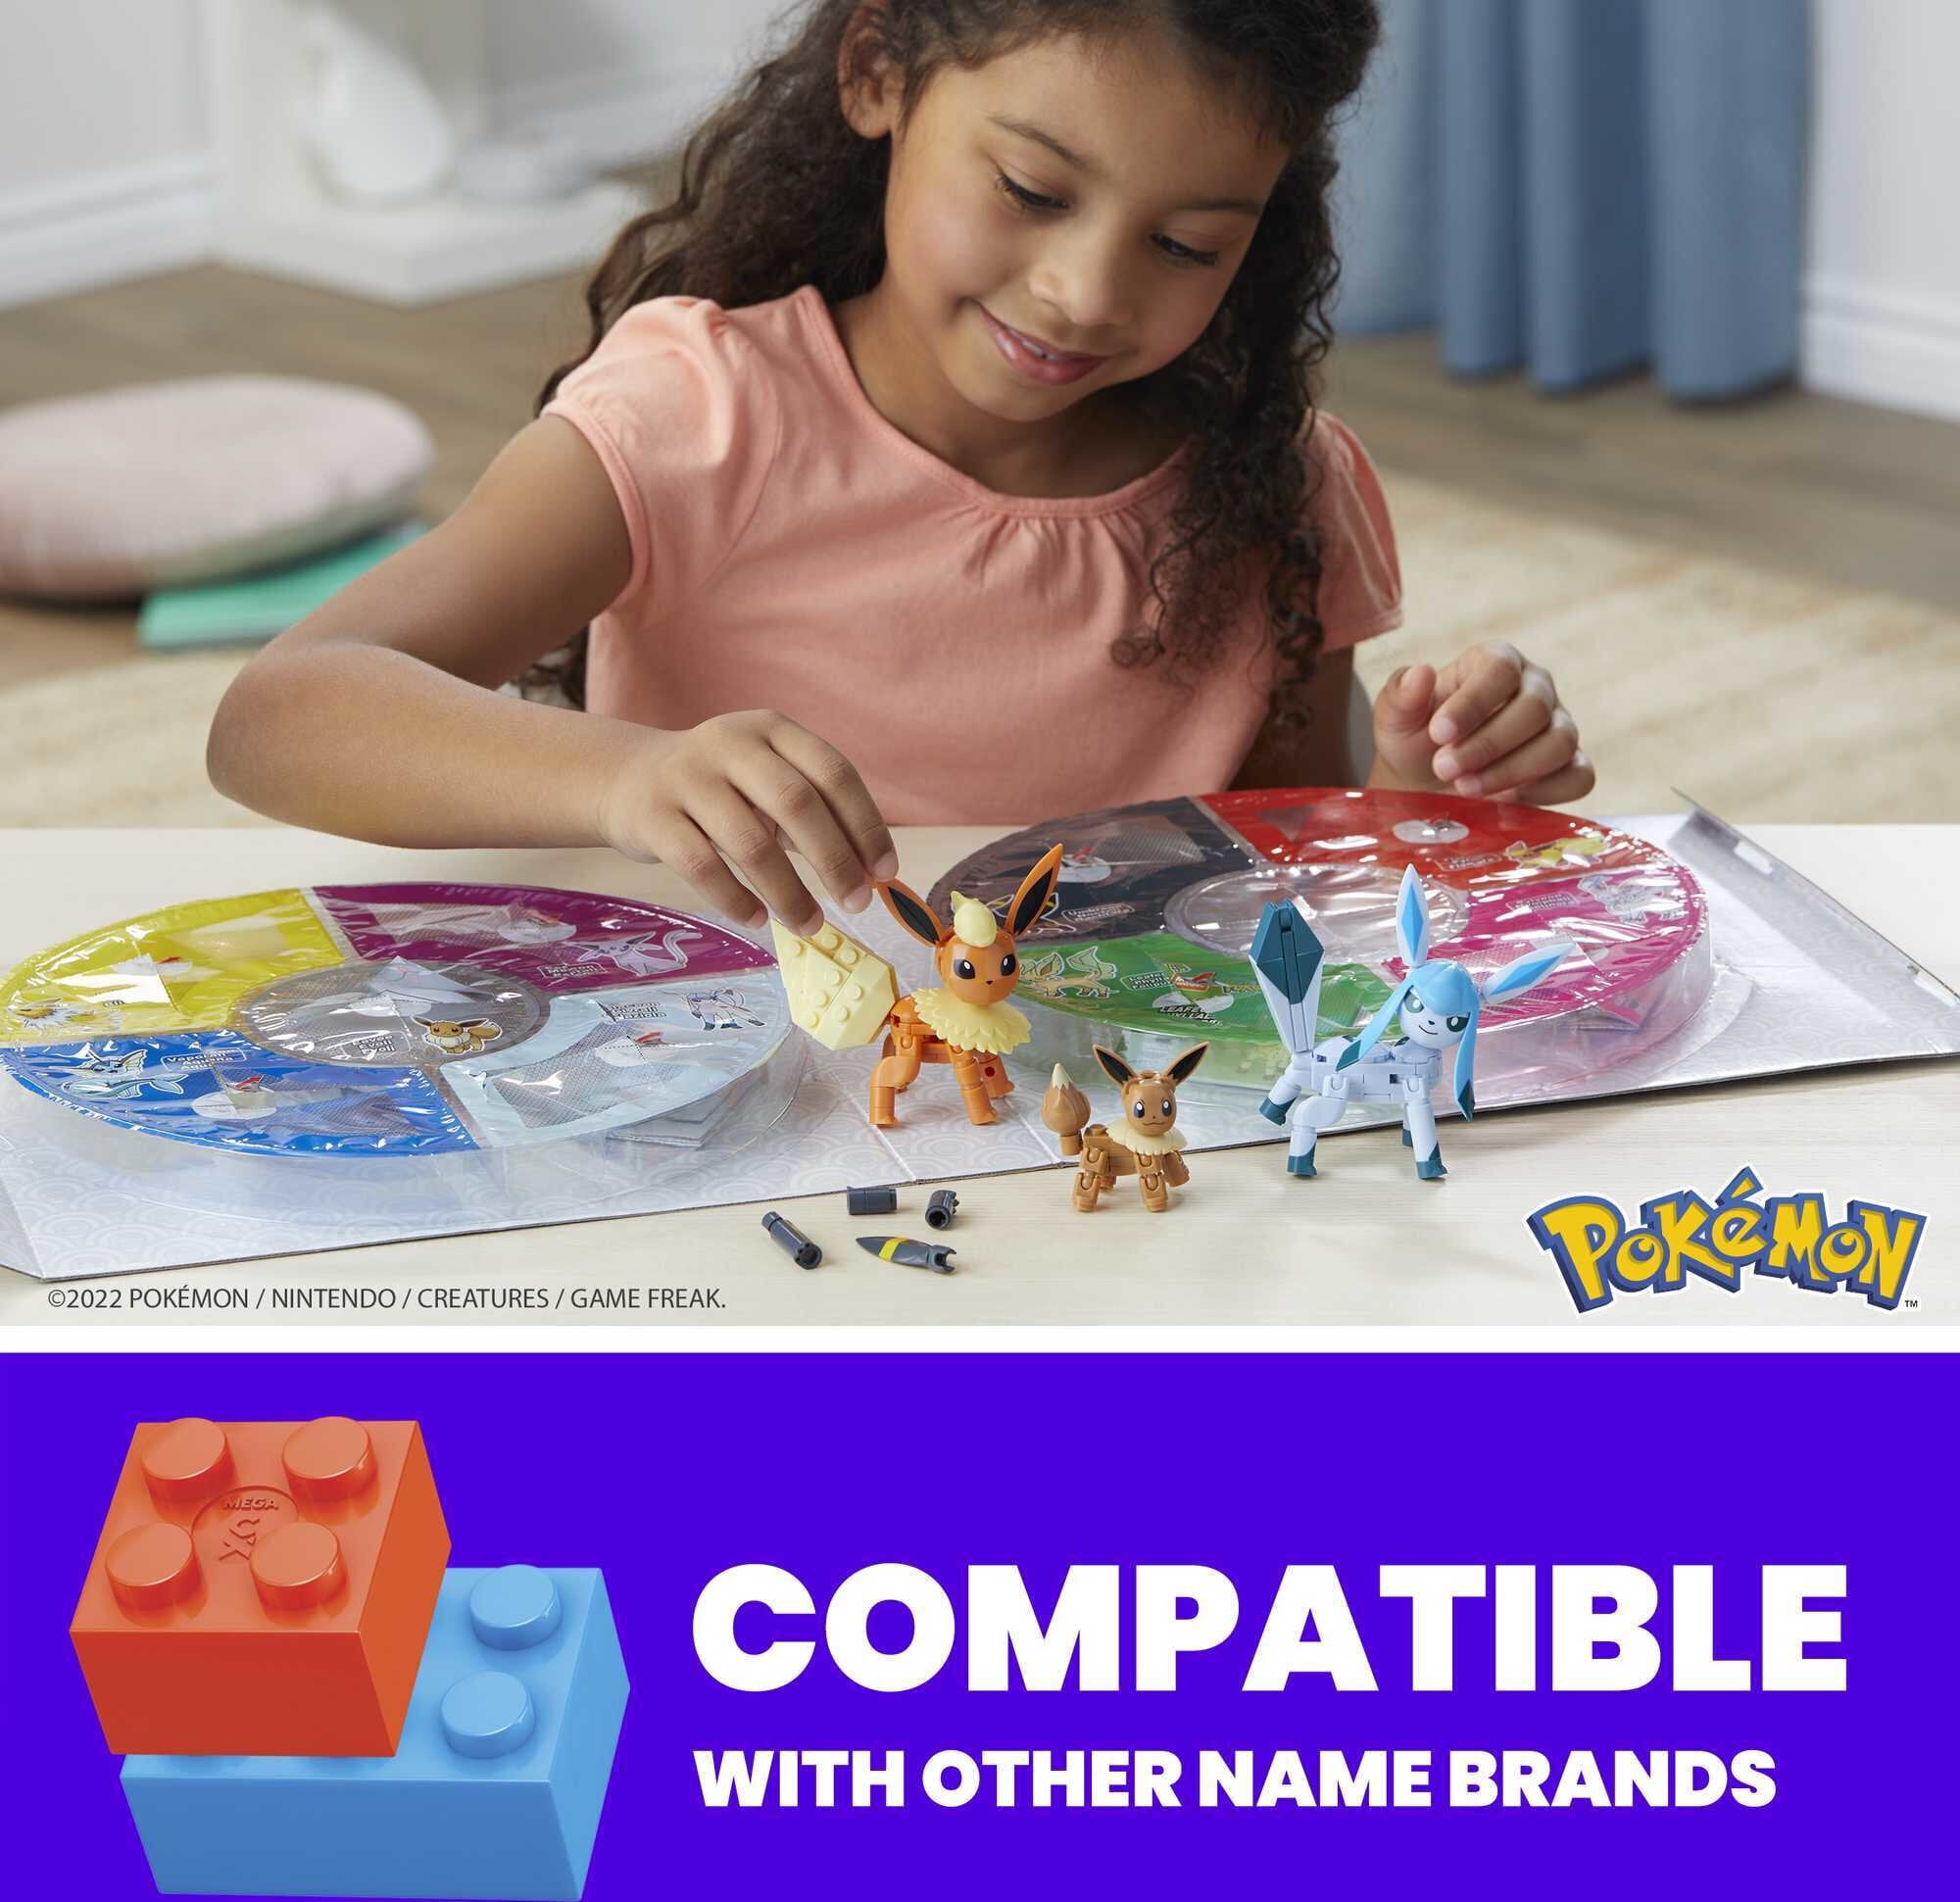  MEGA Pokemon Action Figure Building Toys for Kids, Every Eevee  Evolution with 470 Pieces, 9 Poseable Characters, Gift Idea : Toys & Games